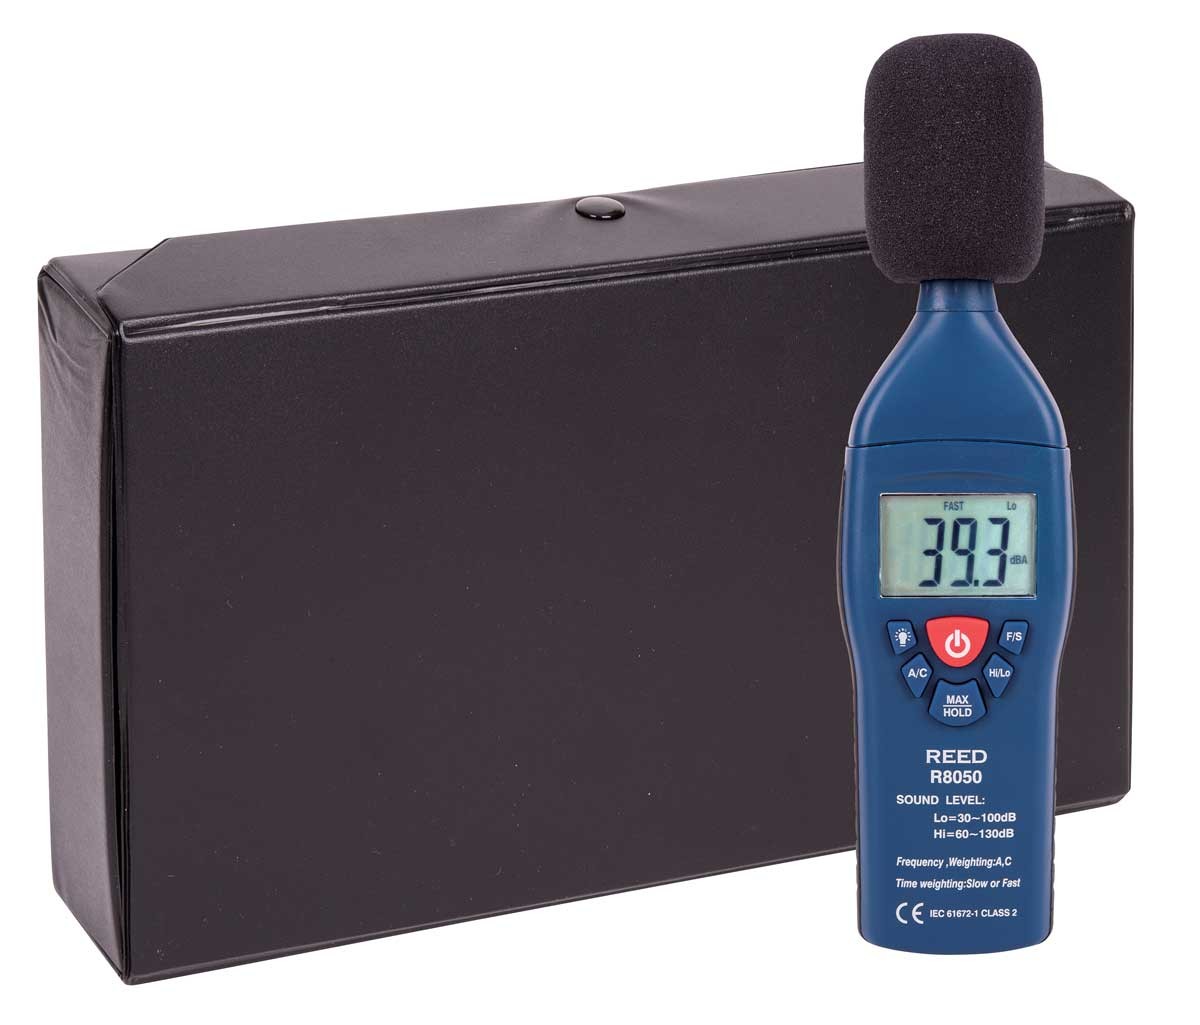 Reed Instruments R8050 Sound Level Meter Included